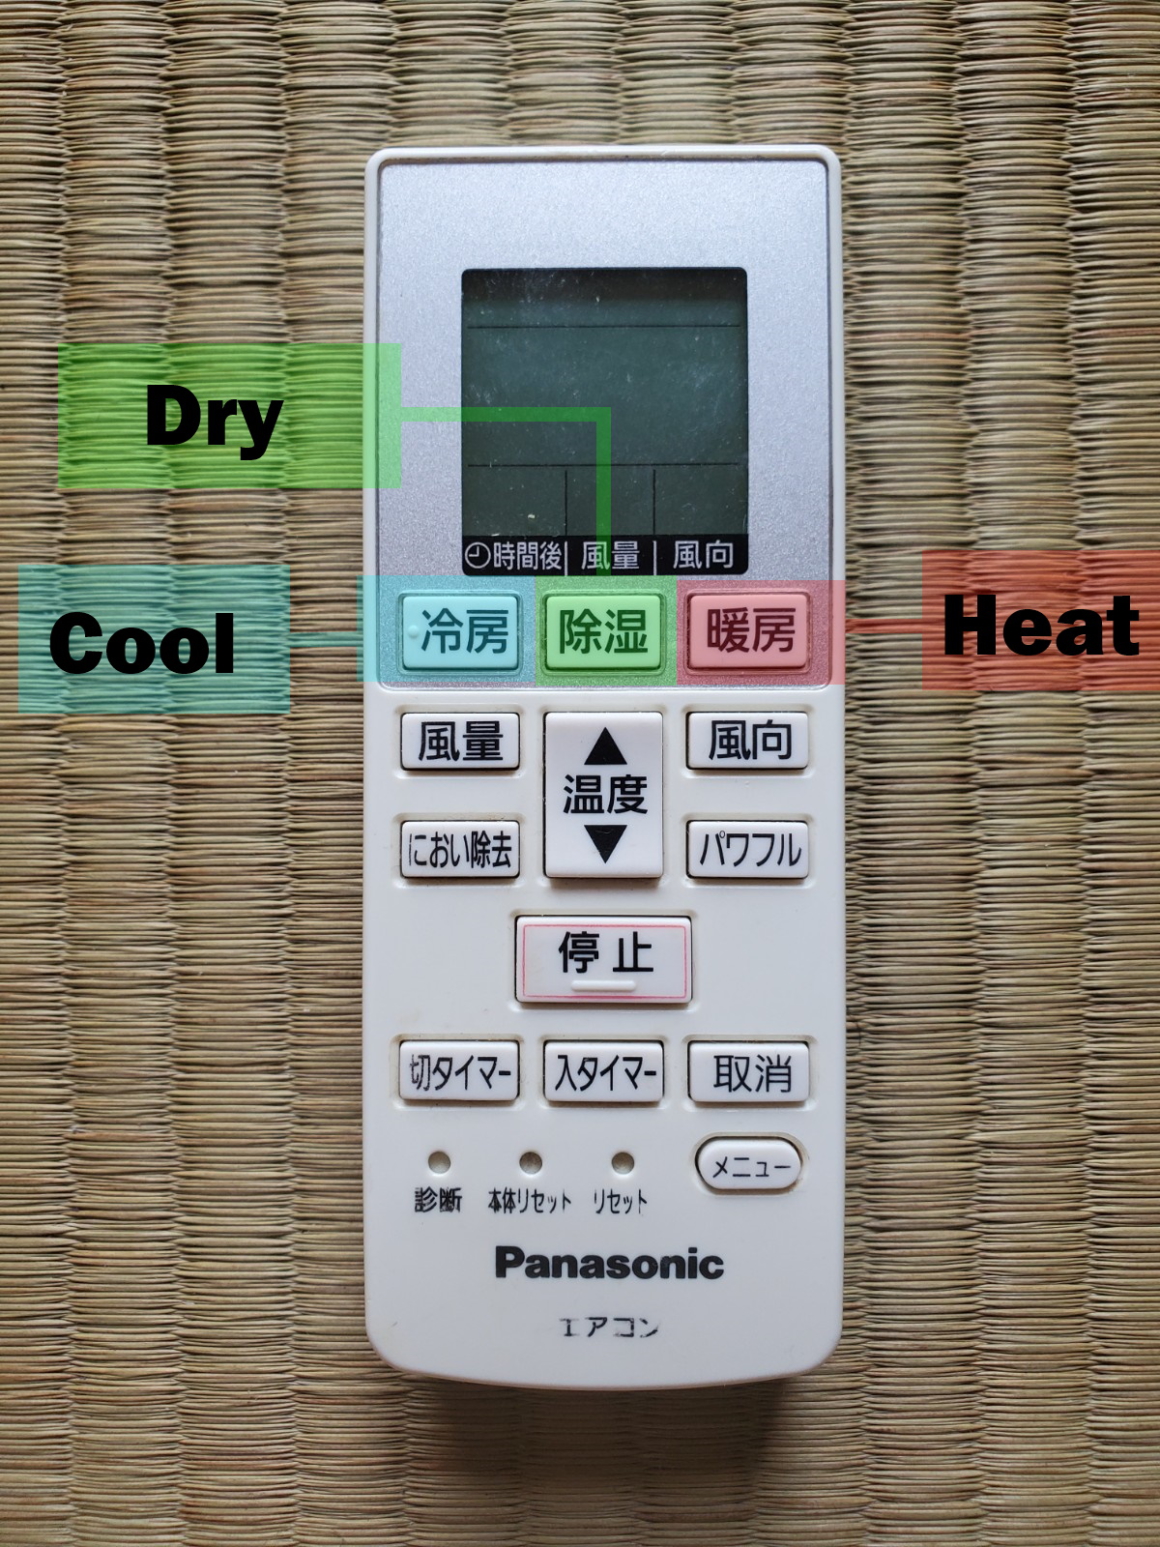 The Ultimate Guide to Japanese Air Conditioners (With Photos of 6